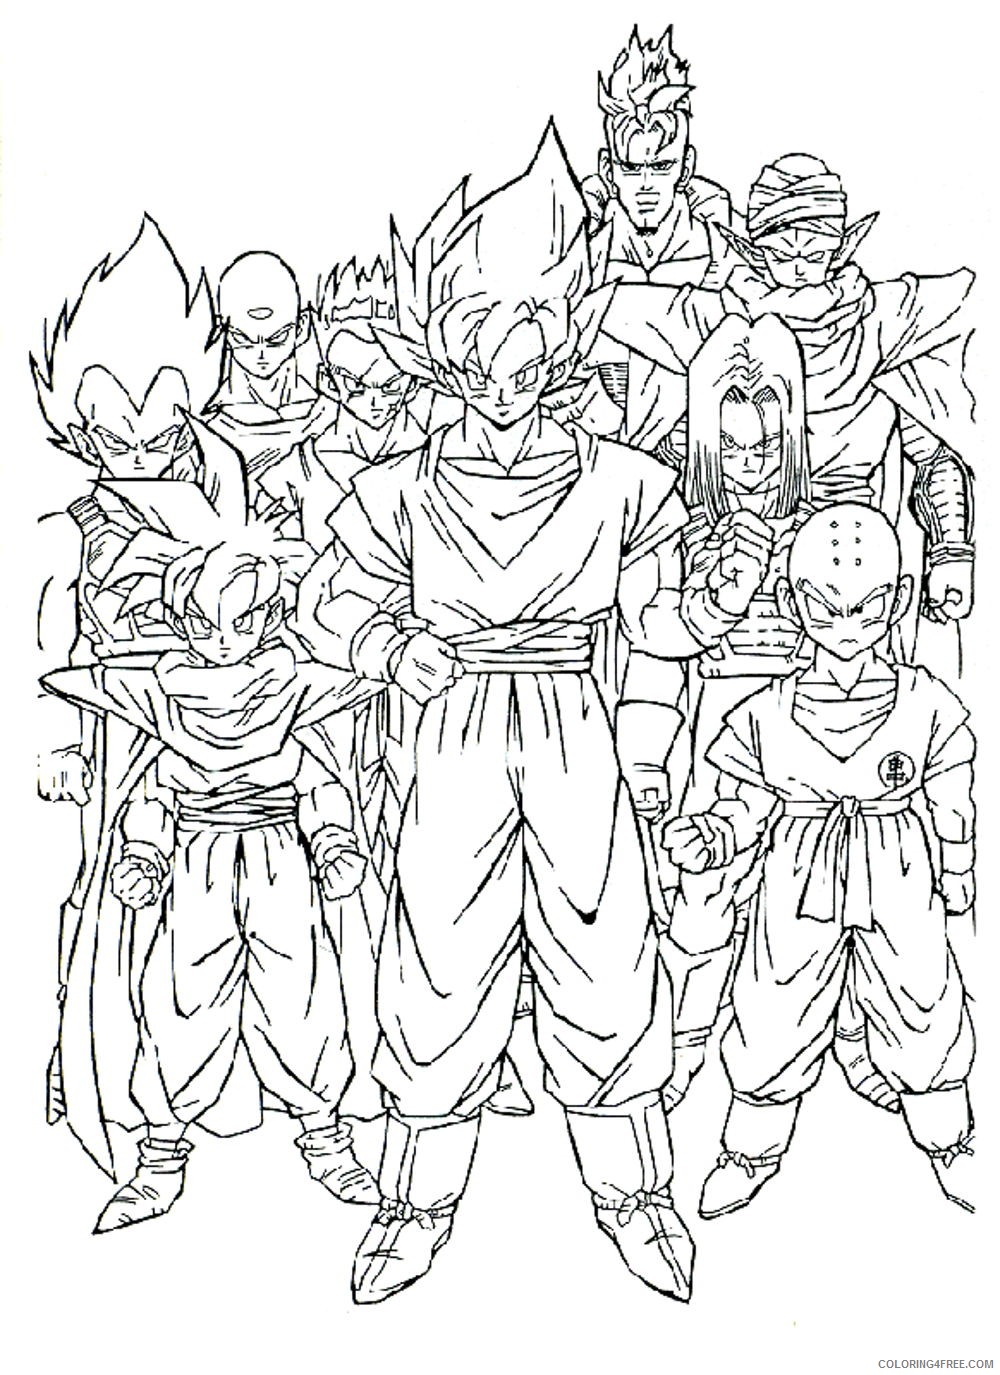 dragon ball z coloring pages all characters Coloring4free